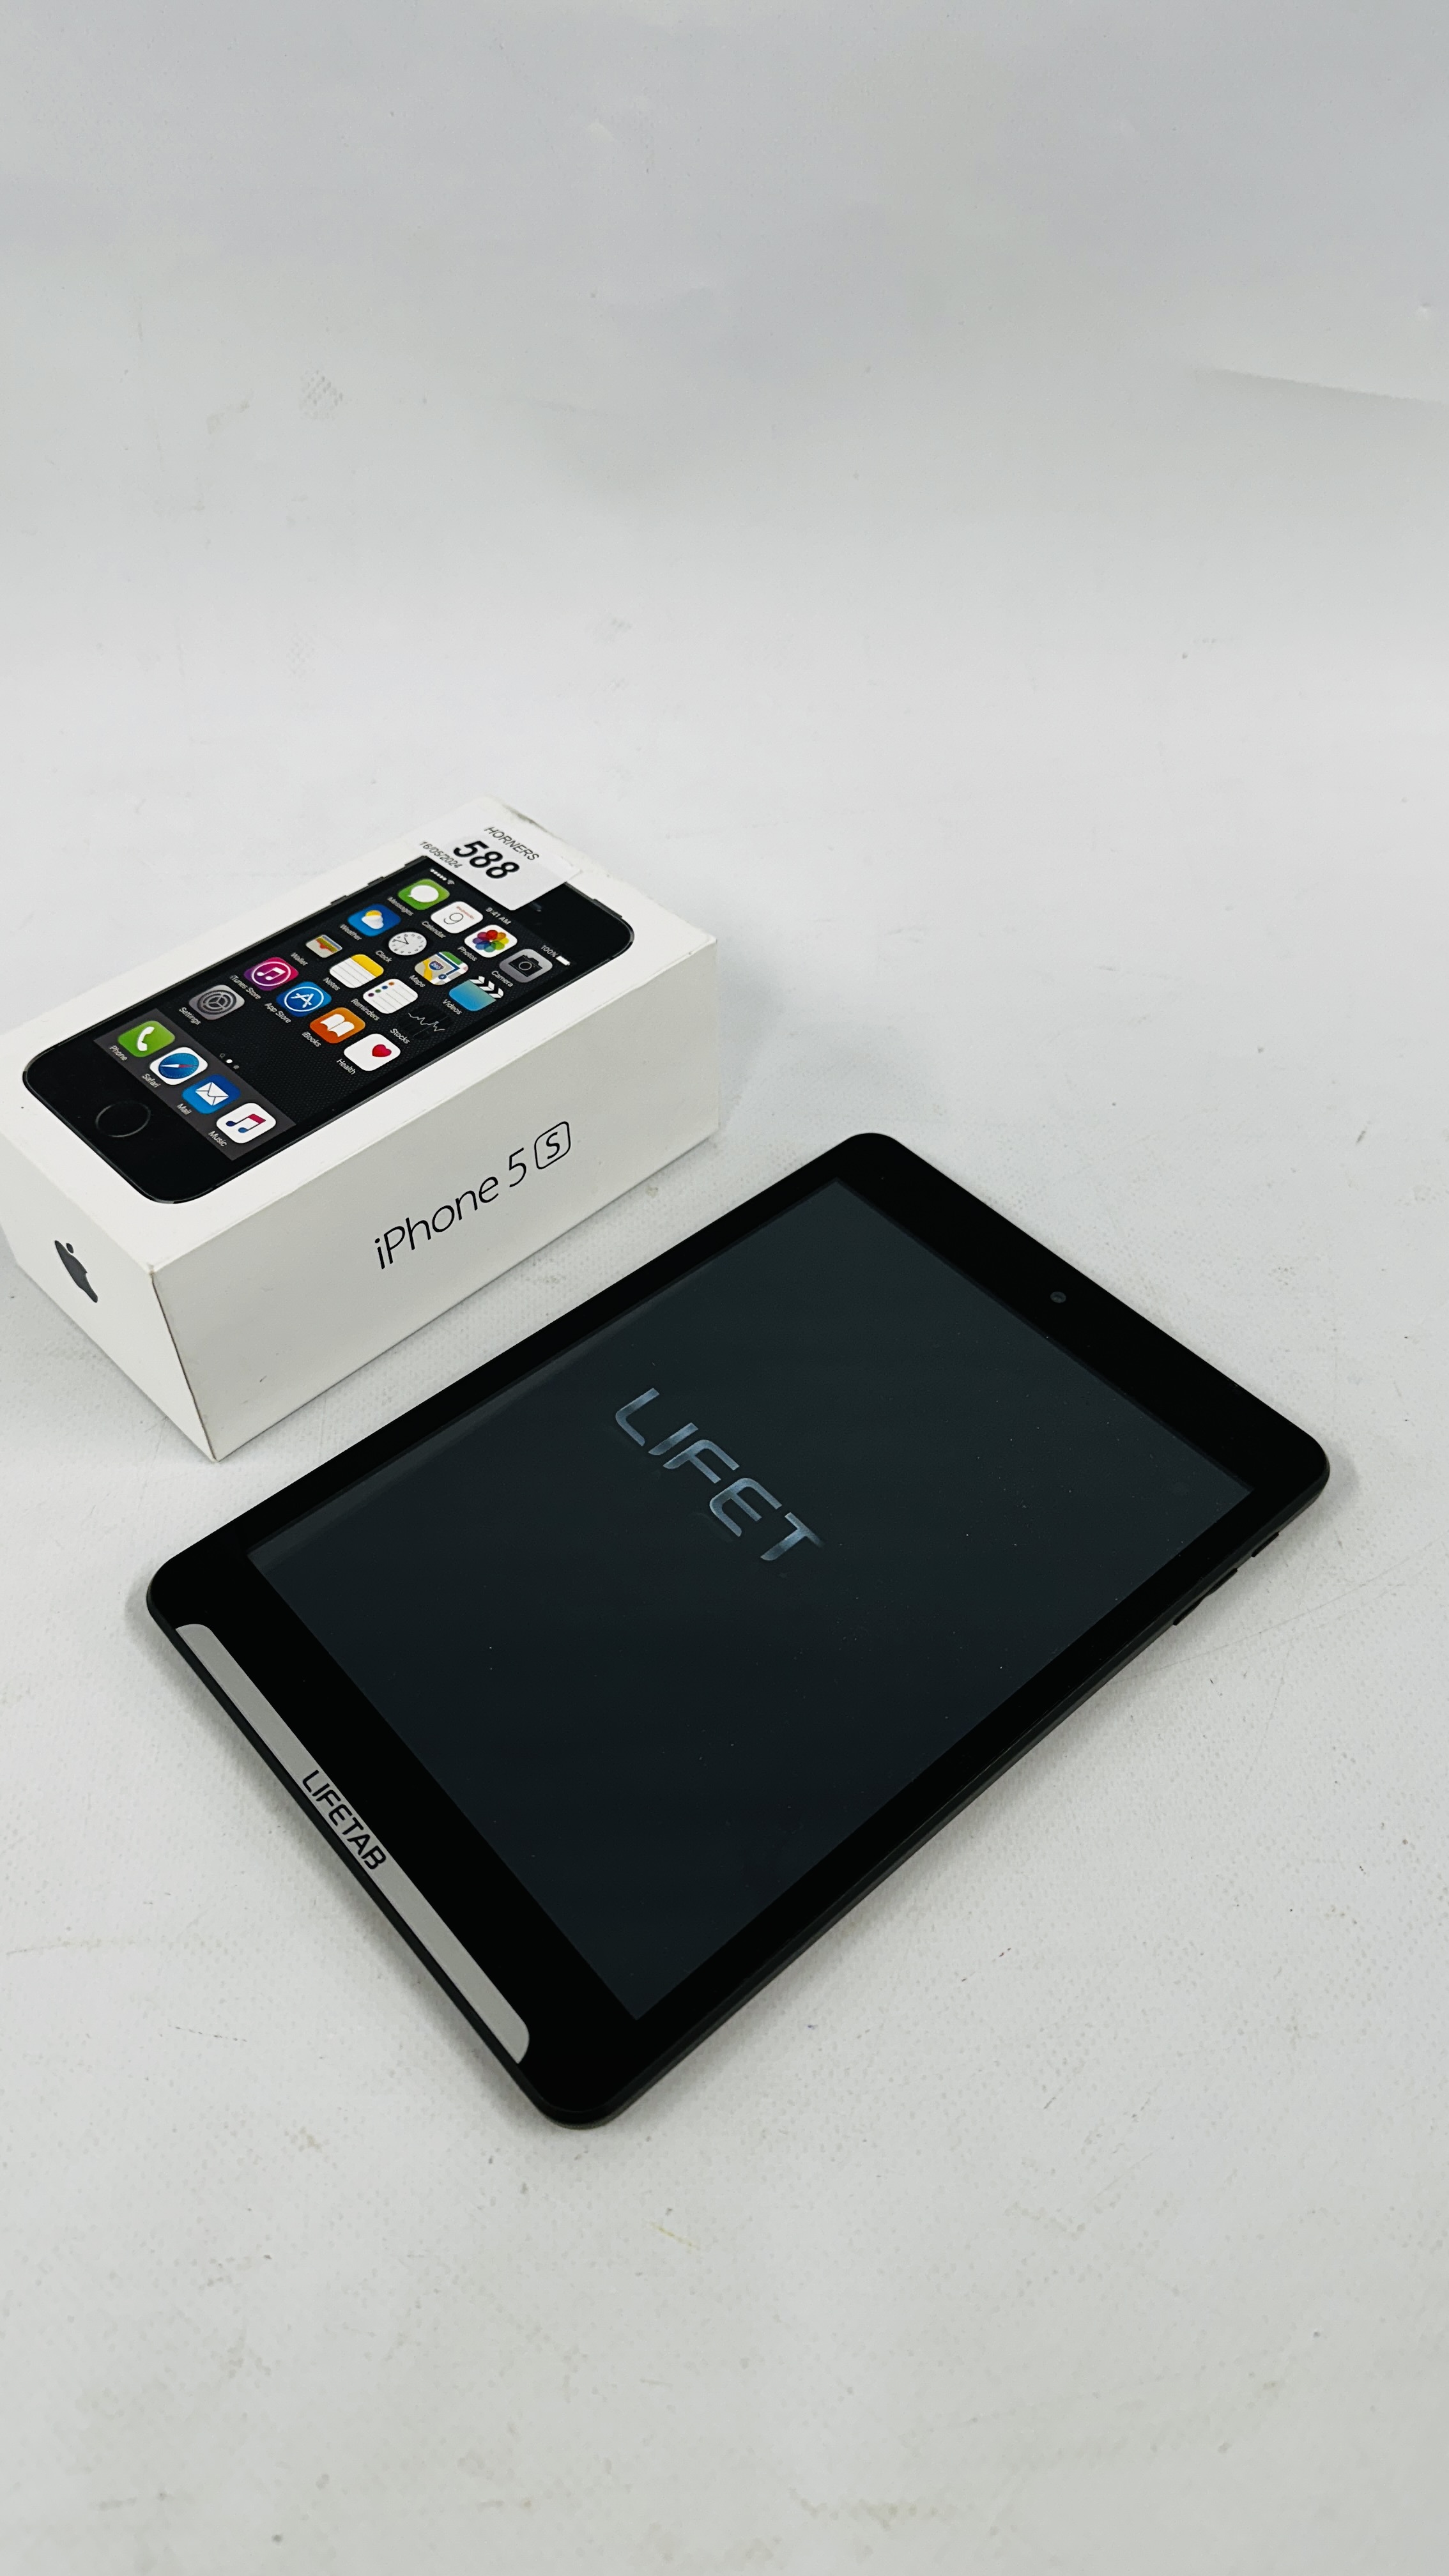 IPHONE 5 16GB IMEI 359138071732571 AND MEDION "LIFETAB" TABLET - SOLD AS SEEN. - Image 8 of 10